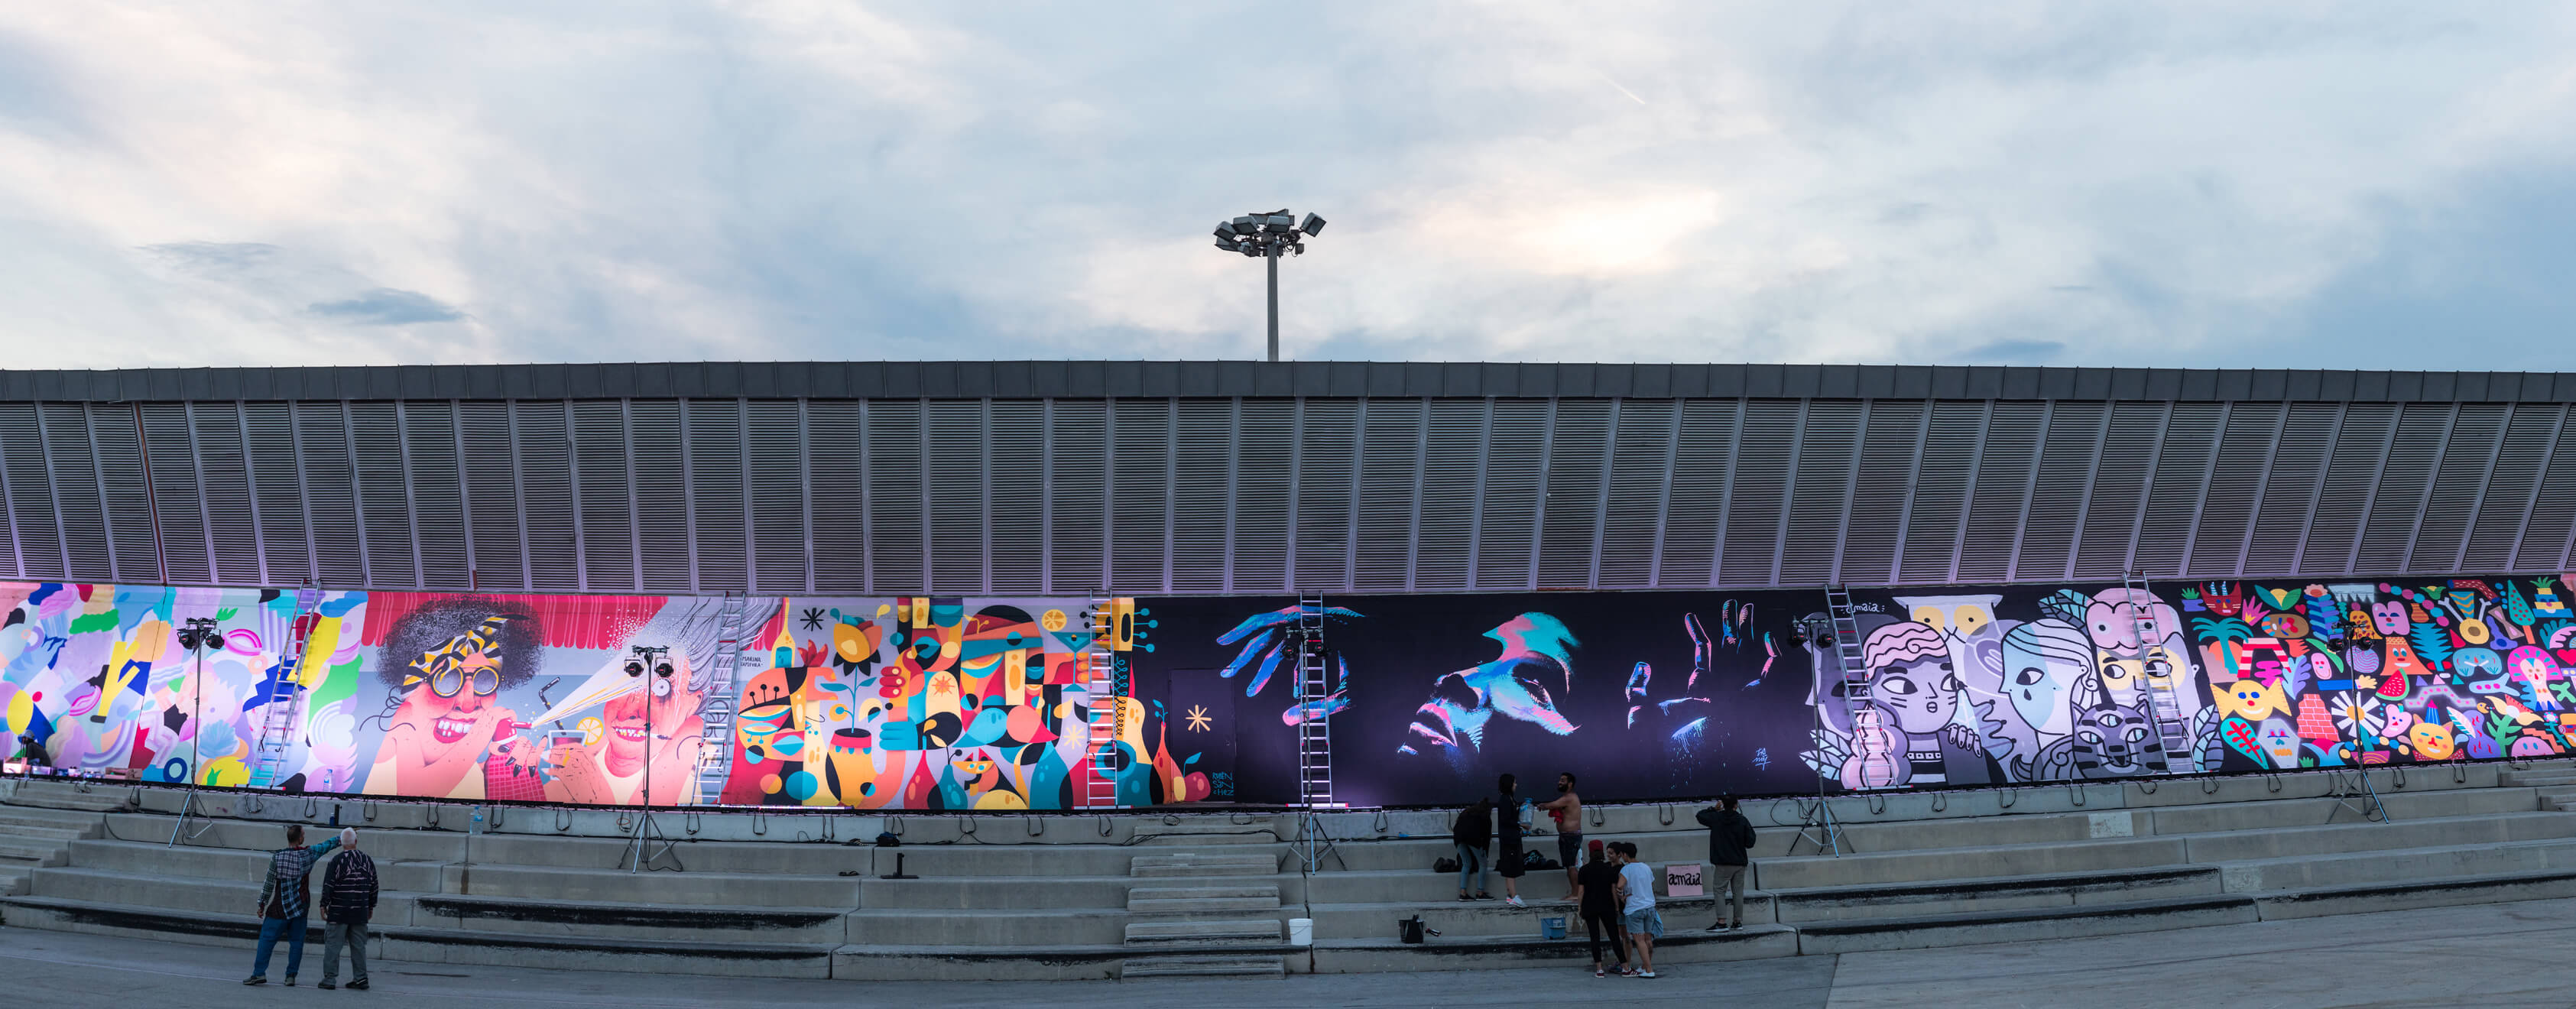 Creative wall of street art at the Primavera Sound music festival in Barcelona sponsored by SEAT